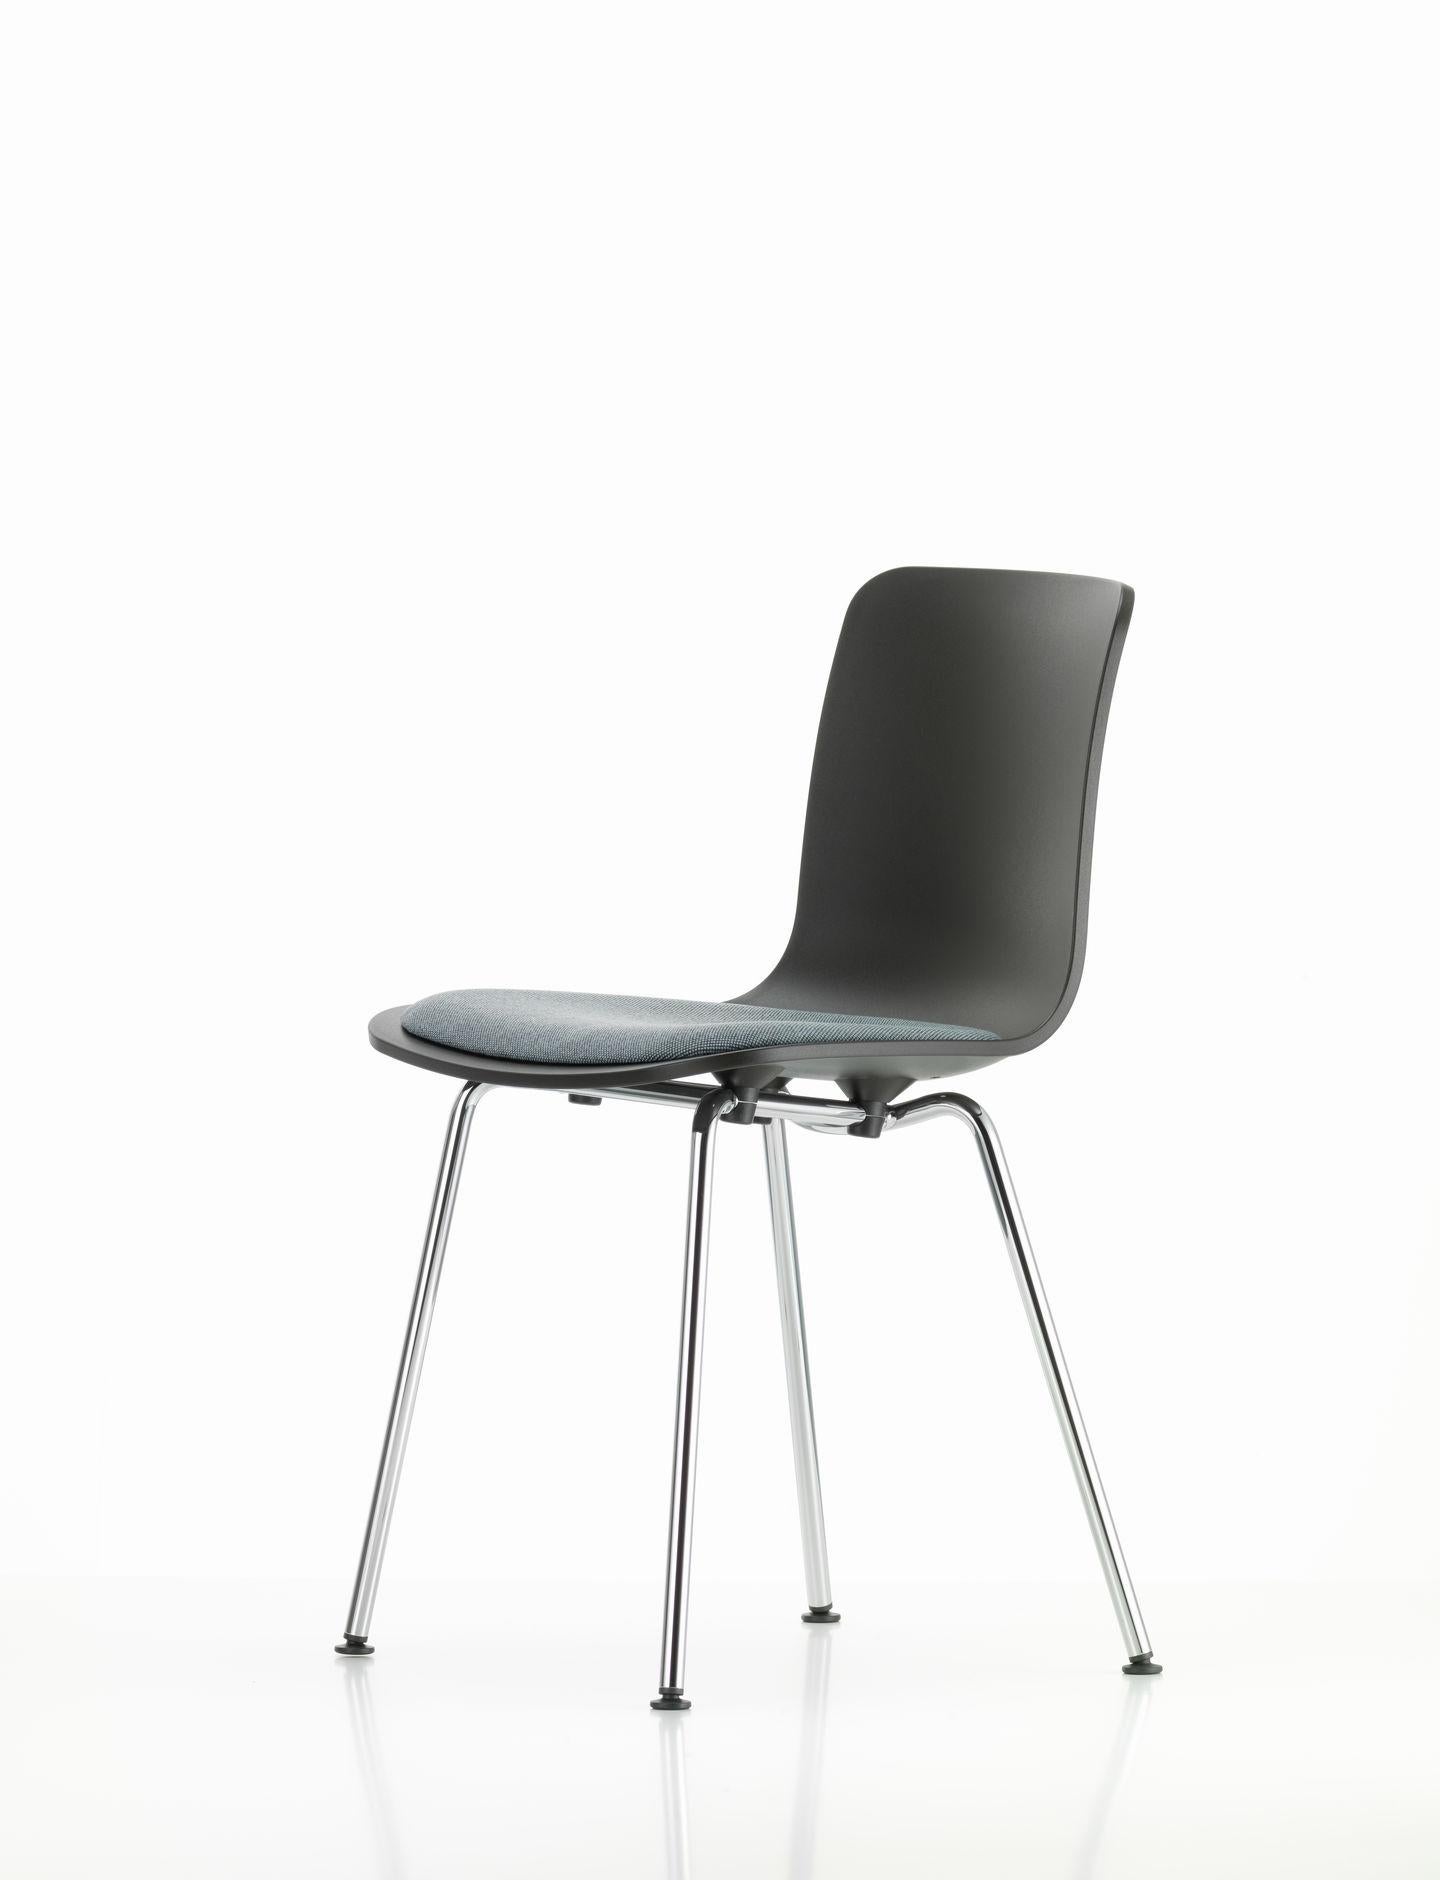 Chair designed by Jasper Morrison in 2010.
Manufactured by Vitra, Switzerland.

The HAL Tube chair is designed with a classic, unassuming four-legged base and a flexible, plastic shell offering excellent comfort. This model is no stackable.